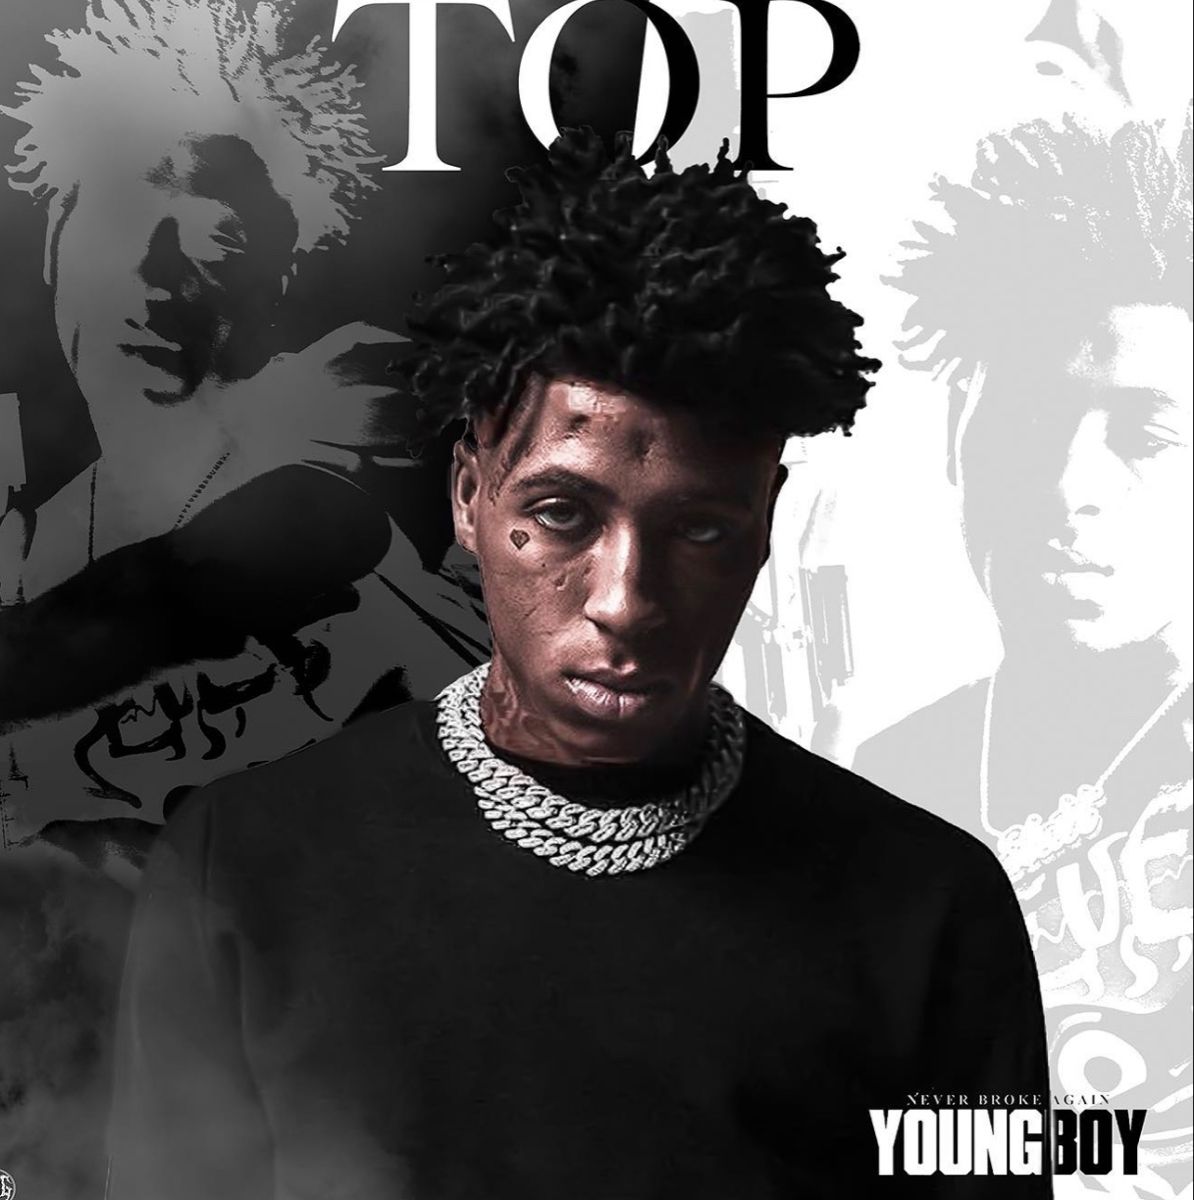 YoungBoy Never Broke Again shares new album TOP